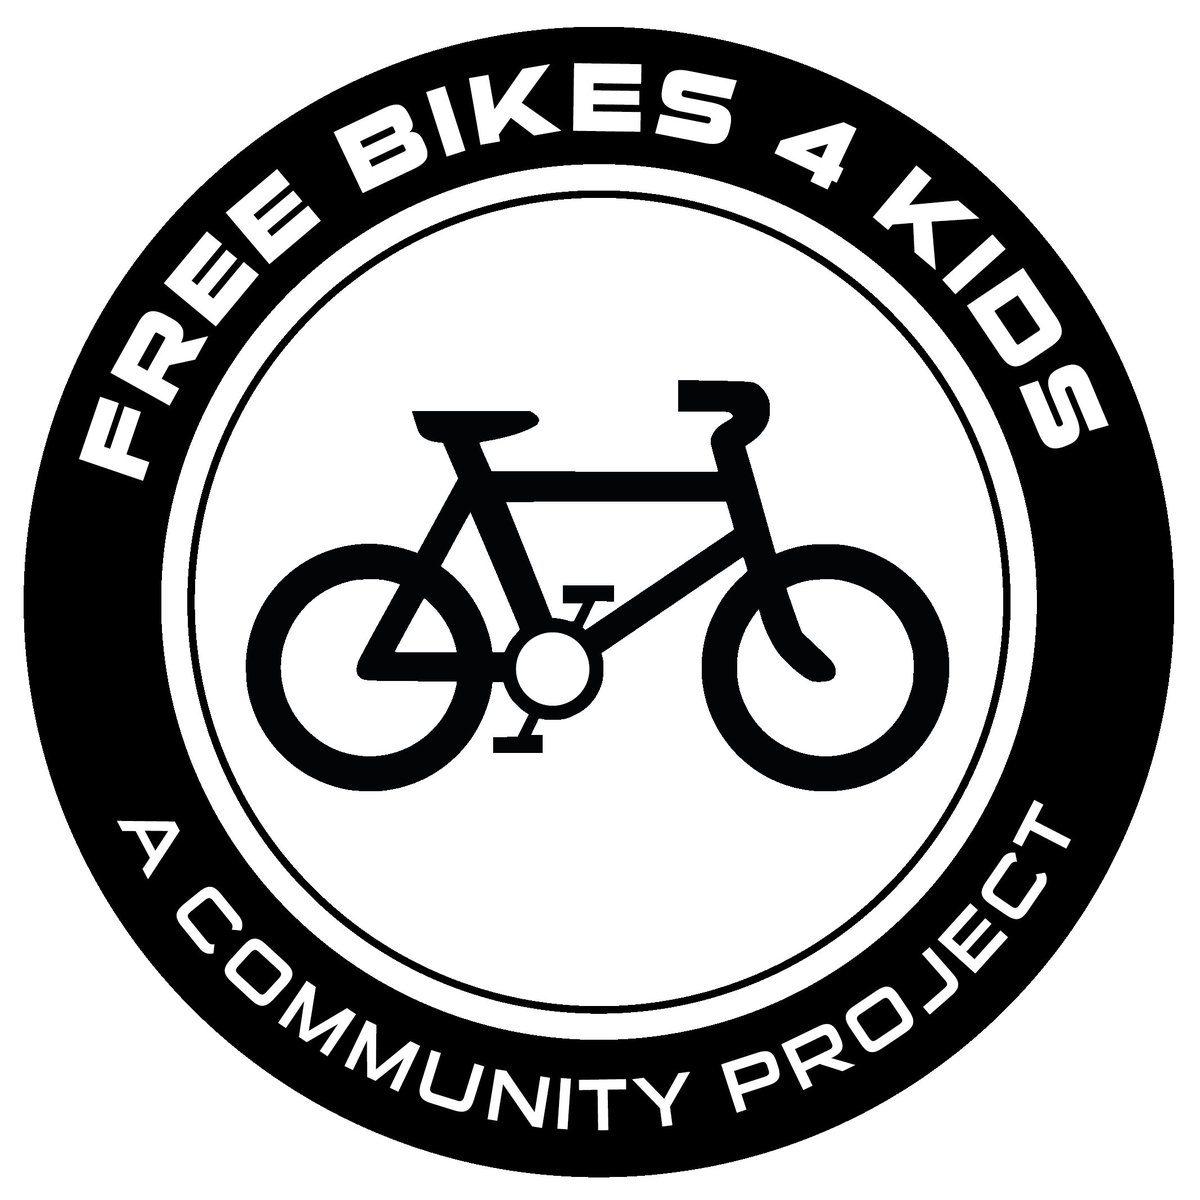 Please dont underestimate how much I appreciate all of you and your ongoing support and enthusiasm for the Freebikes4kids project. 
It literally wouldn't exist without you and you are all a part of its success.
I am running out of ways to say thank you...but THANK YOU all ❤️